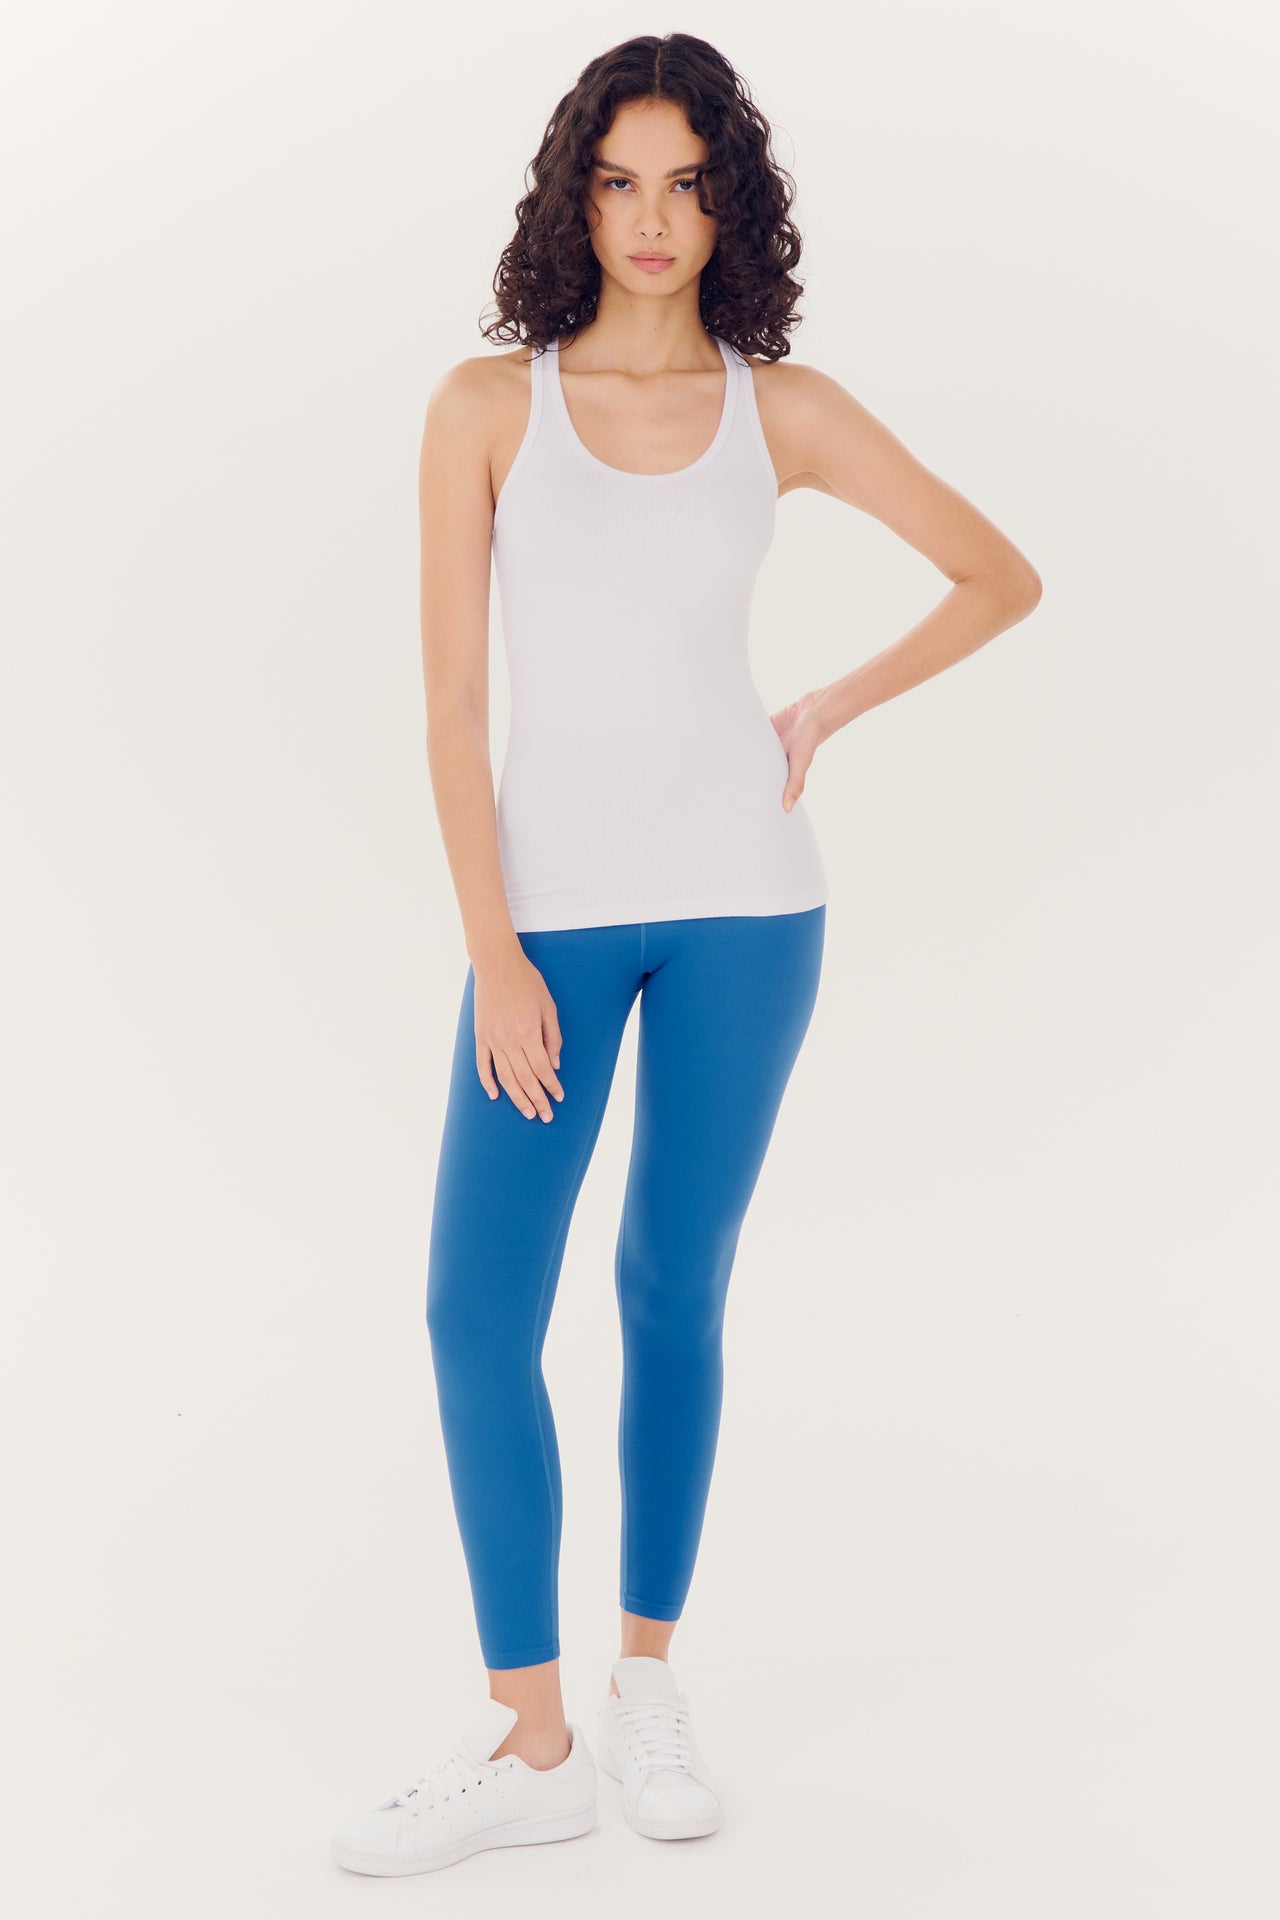 A woman posing in a white tank top and SPLITS59 Airweight High Waist Legging - Stone Blue against a white background.